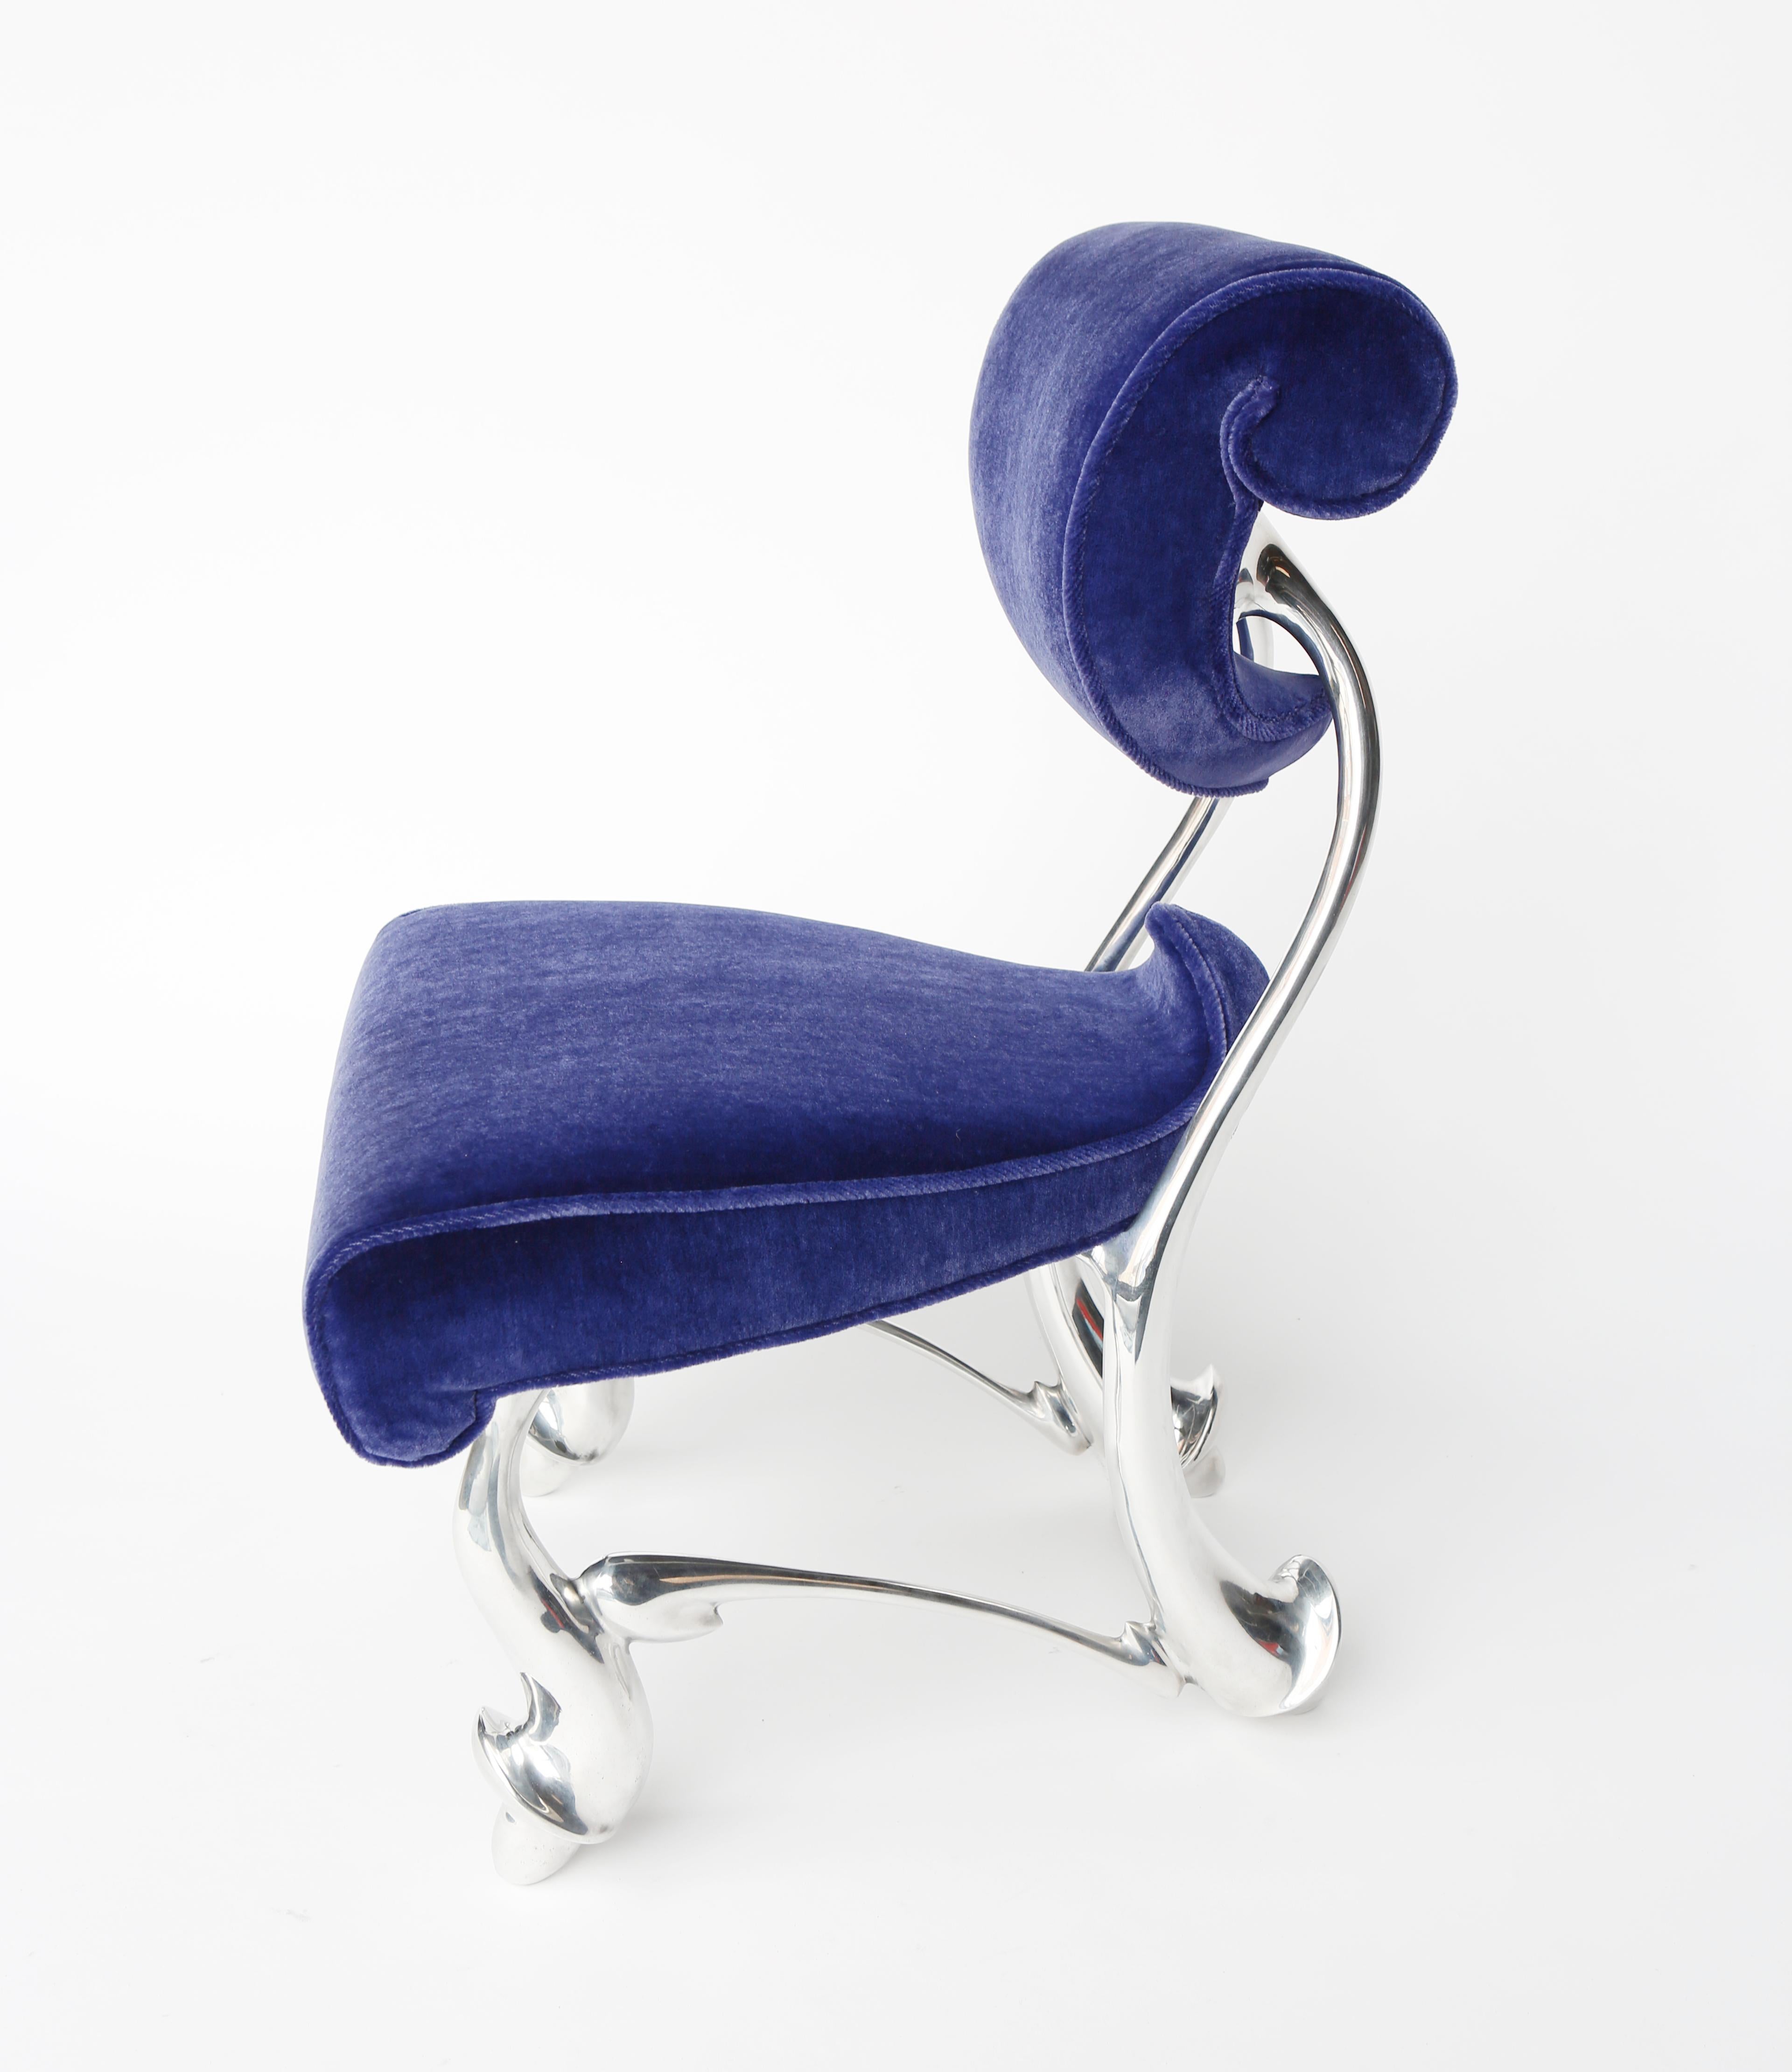 Jordan Mozer (b. 1958), Children's Ballet Chair, (Small): Midnight Blue Wool Mohair and Cast Magnesium-Aluminum, Made in Chicago. 1992/2018. Prototypical, signed. Collection of the artist. Measurements:  19” w x 21” d x 30” h x seat height 15.5